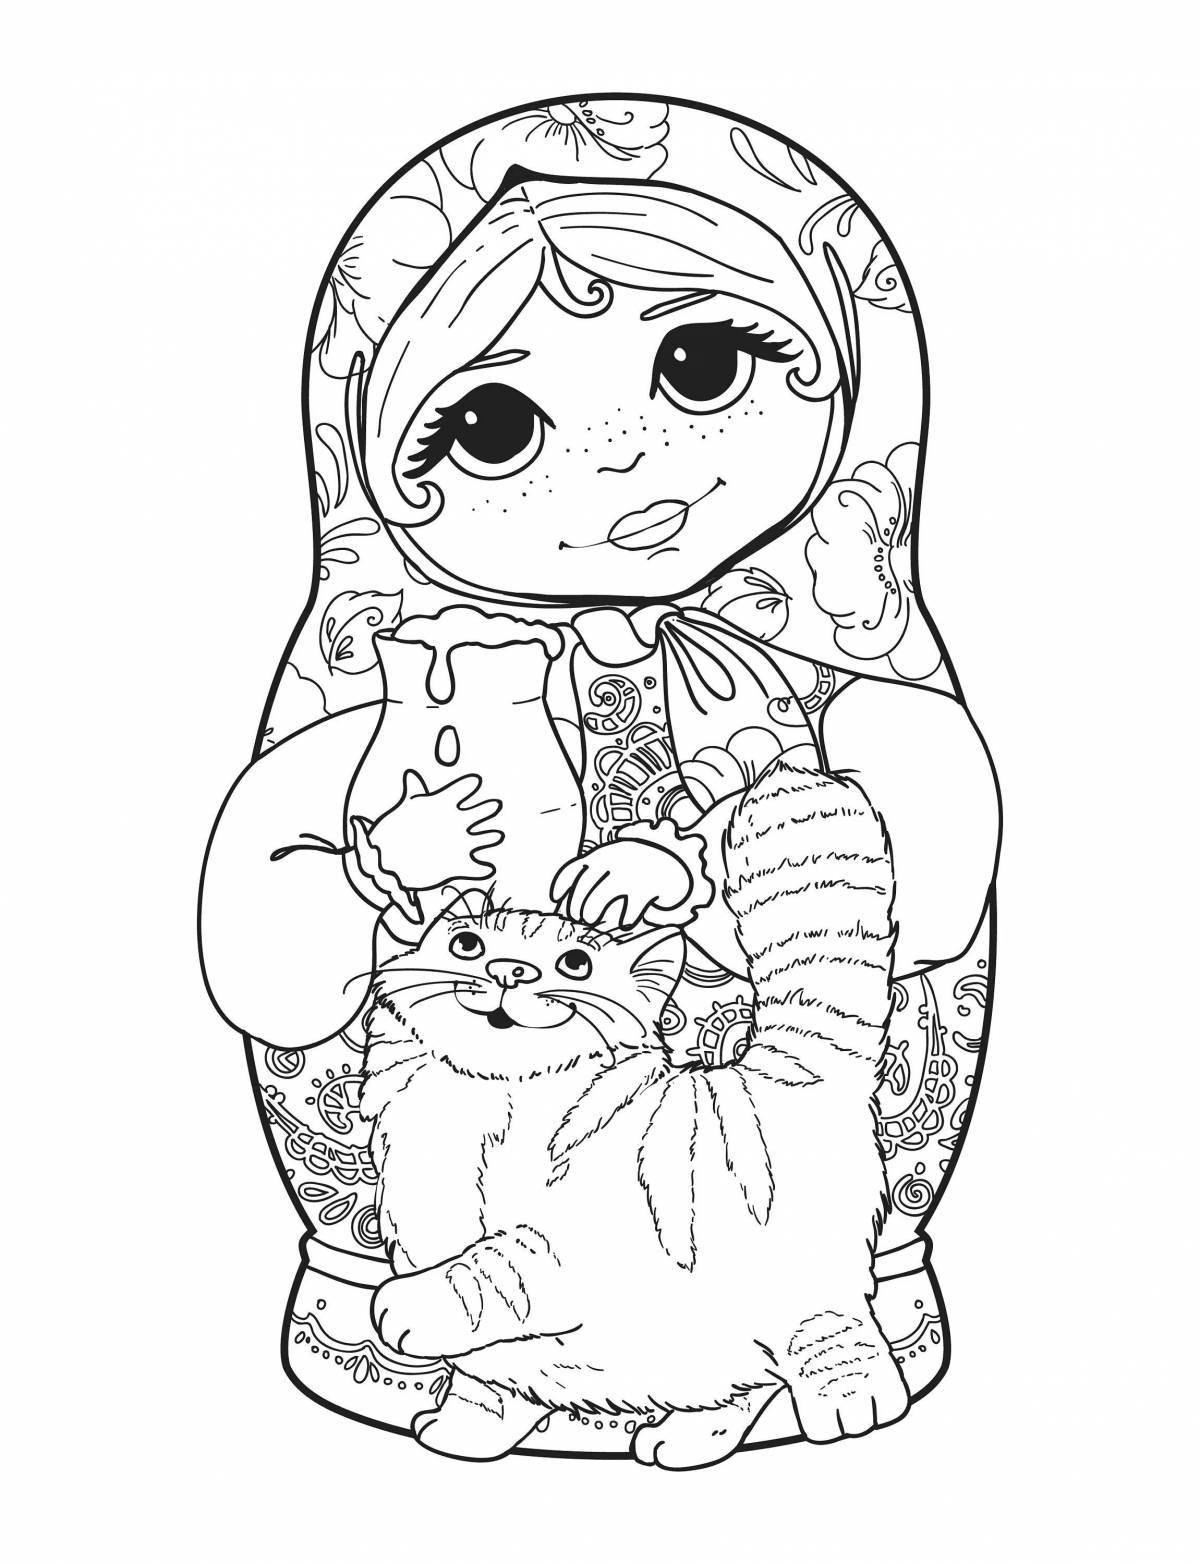 Playful Russian matryoshka coloring book for children 6-7 years old